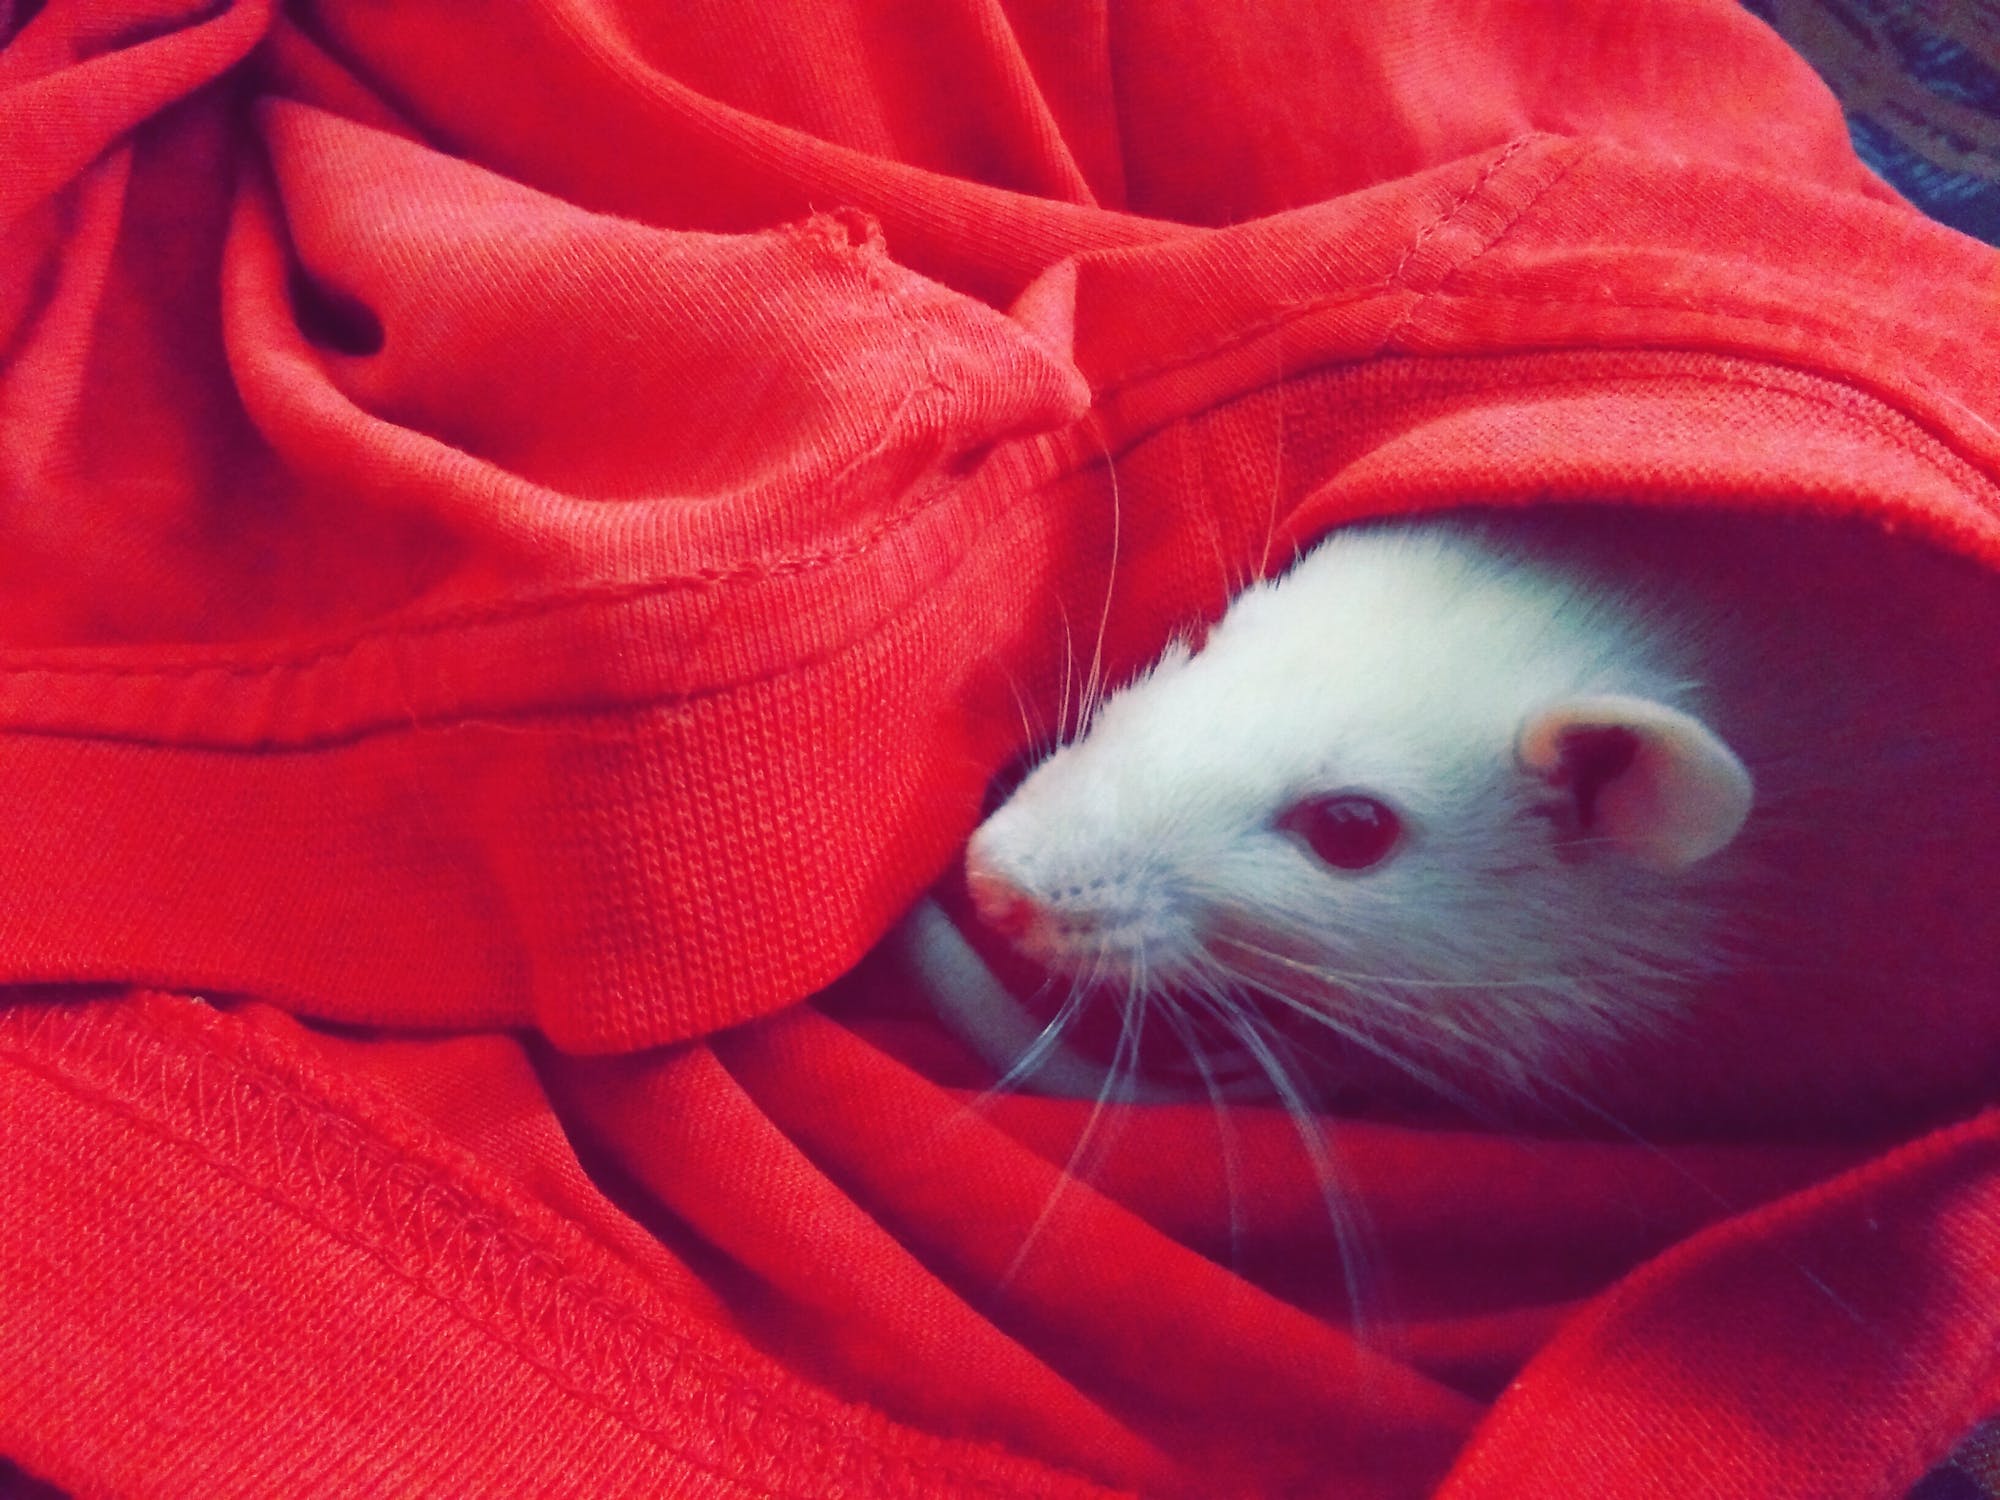  A rat in a red sweater | Source: Pexels